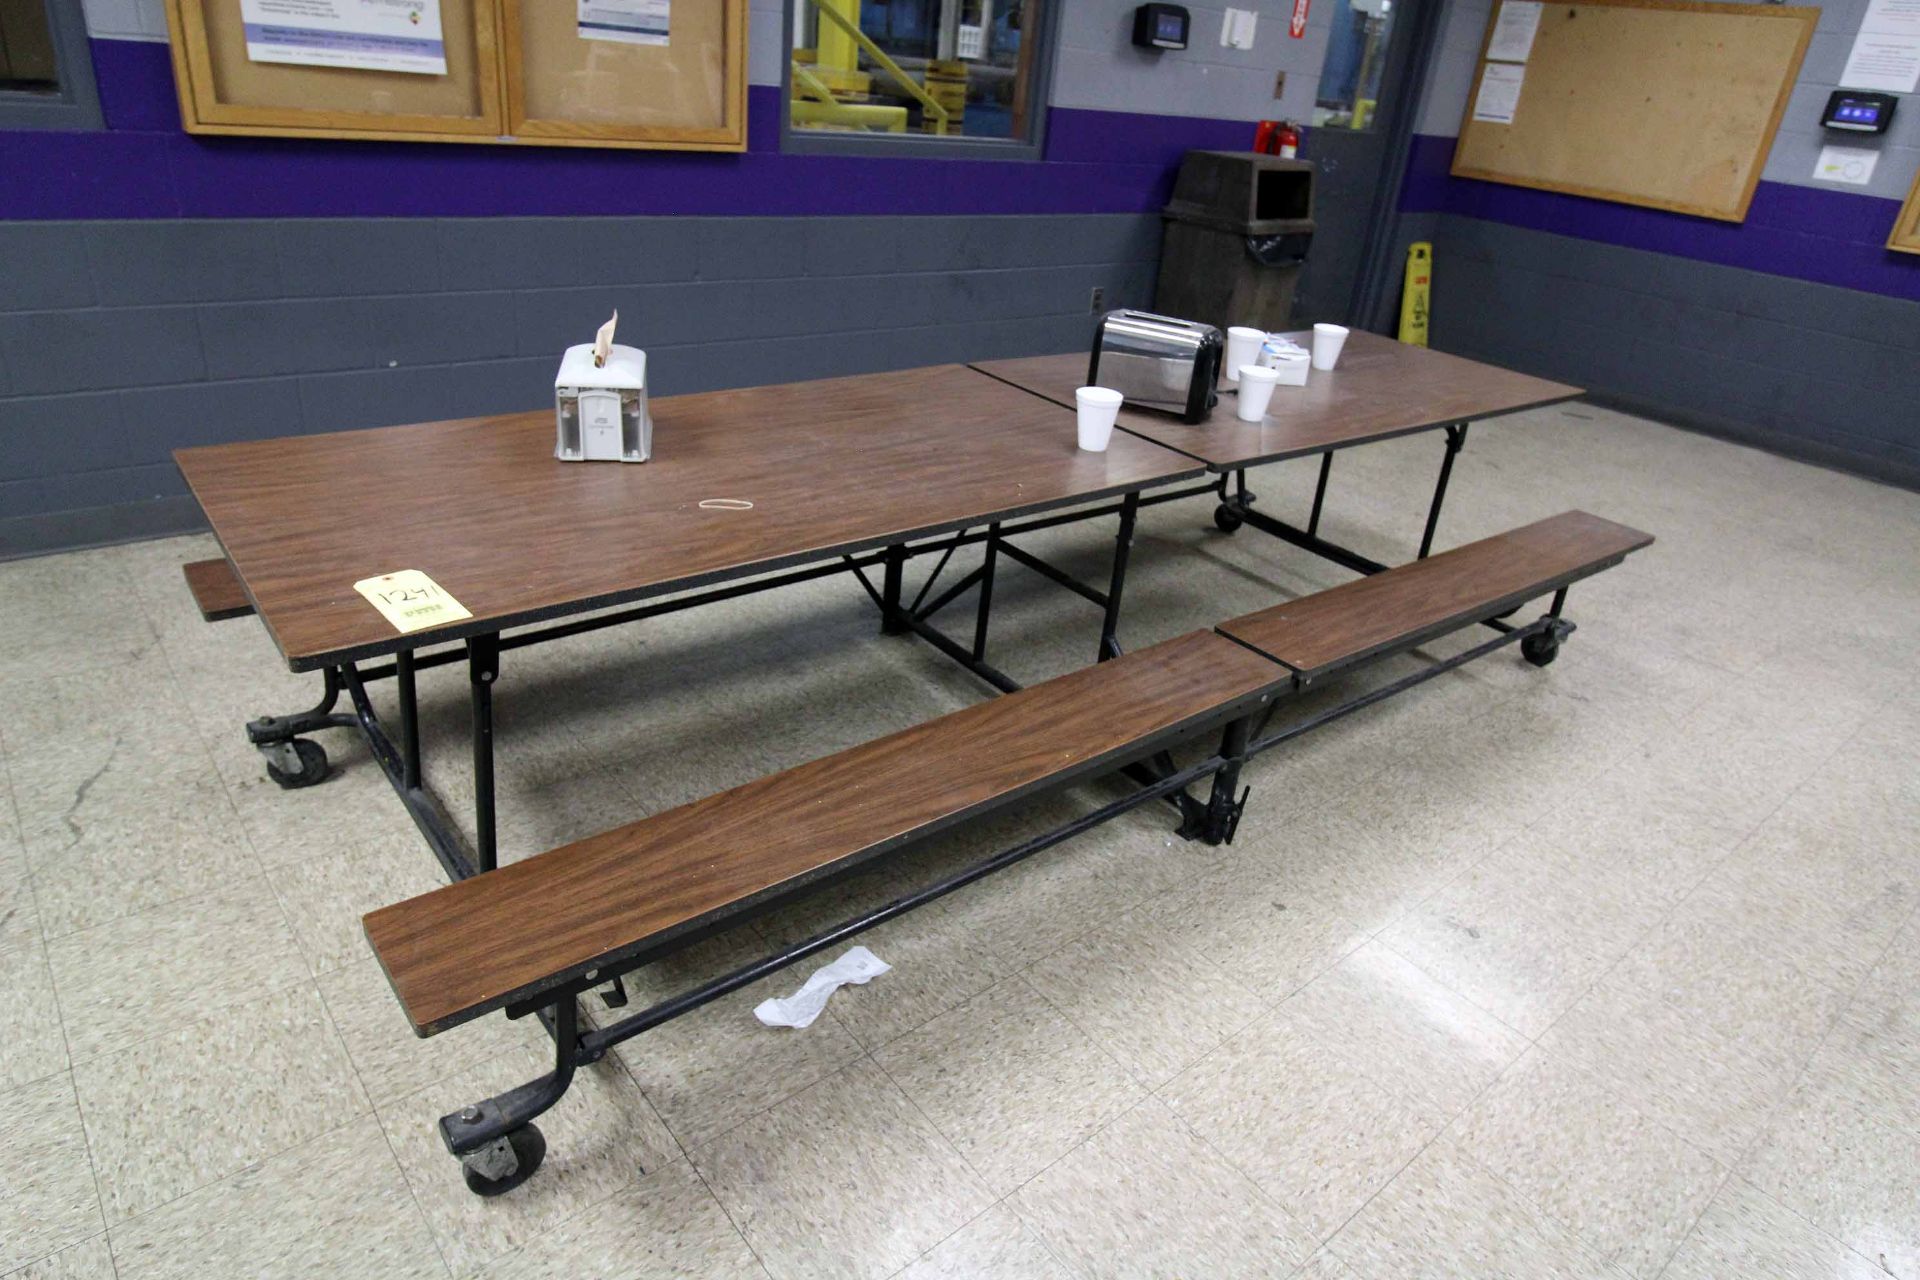 LOT OF CAFETERIA STYLE TABLES (6), 48" x 120"